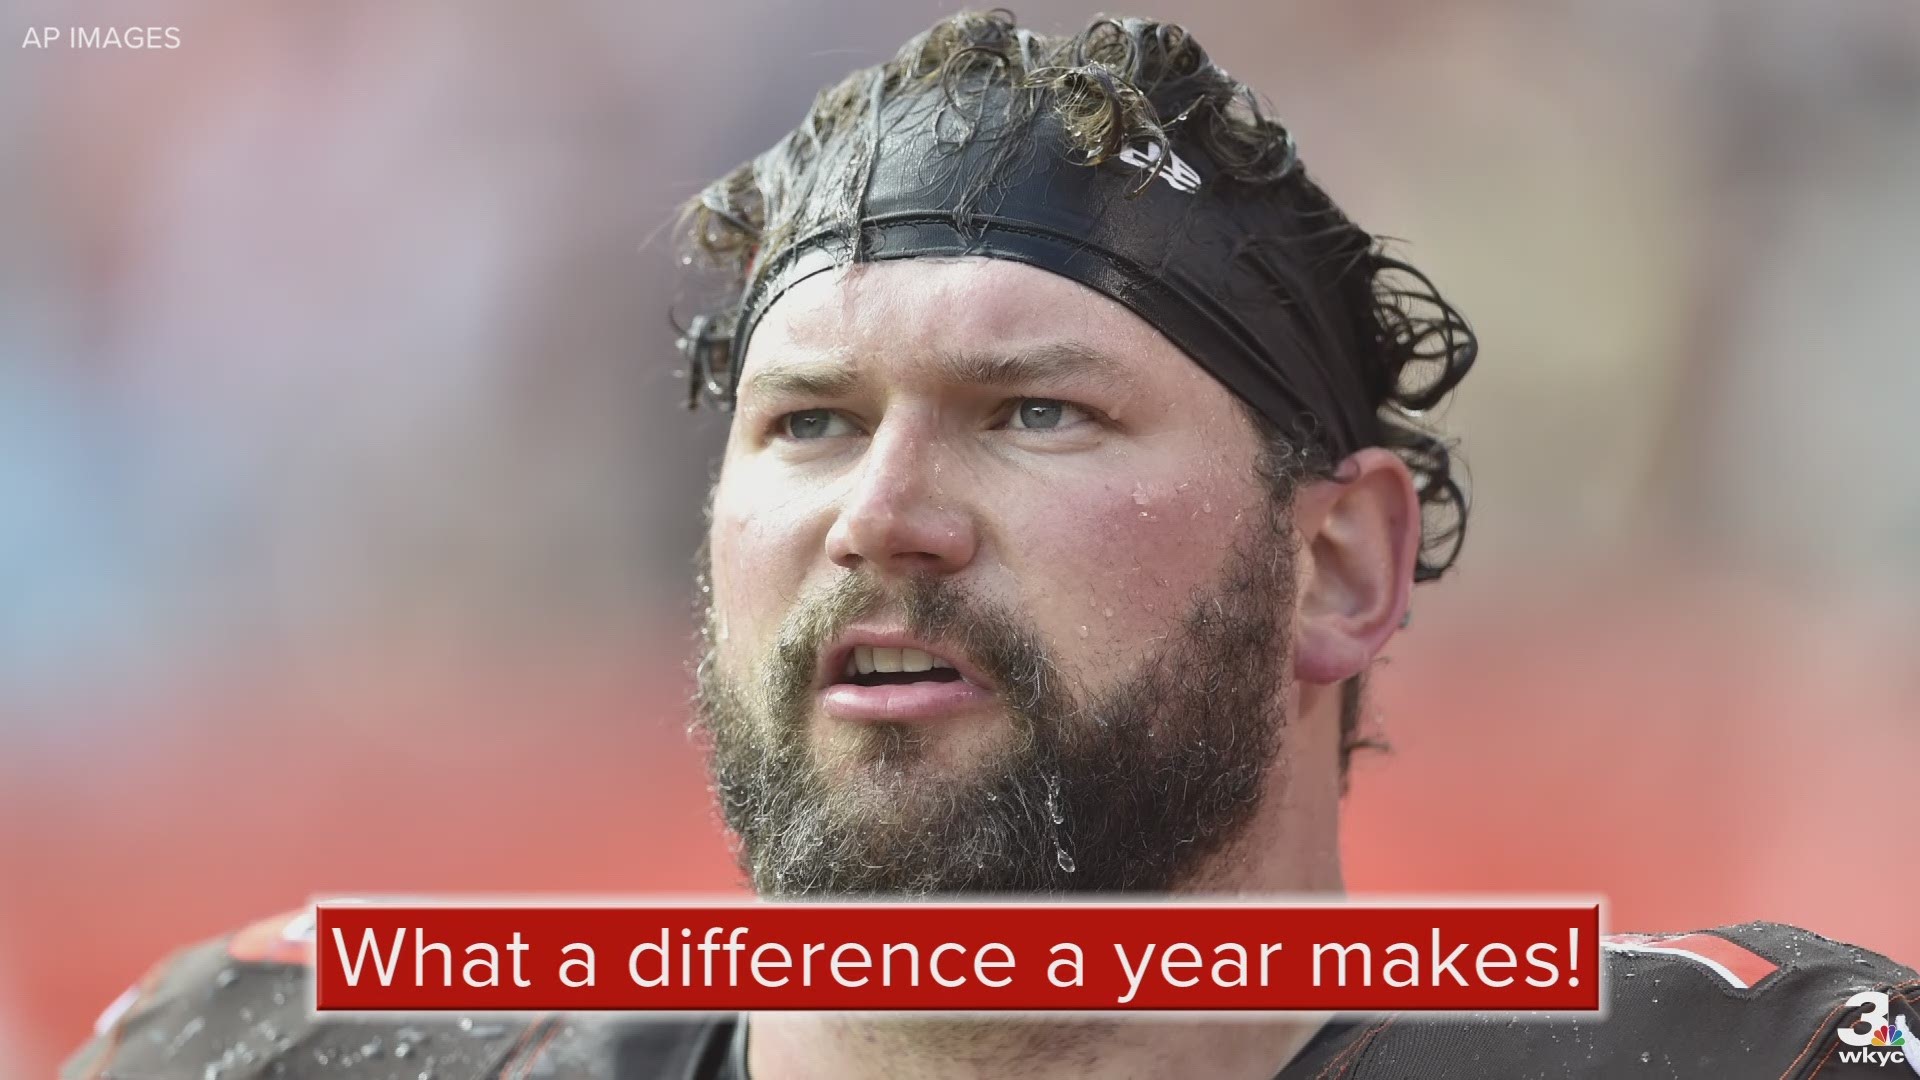 Former Cleveland Browns left tackle Joe Thomas has made an incredible physical transformation one year after retiring from the National Football League.